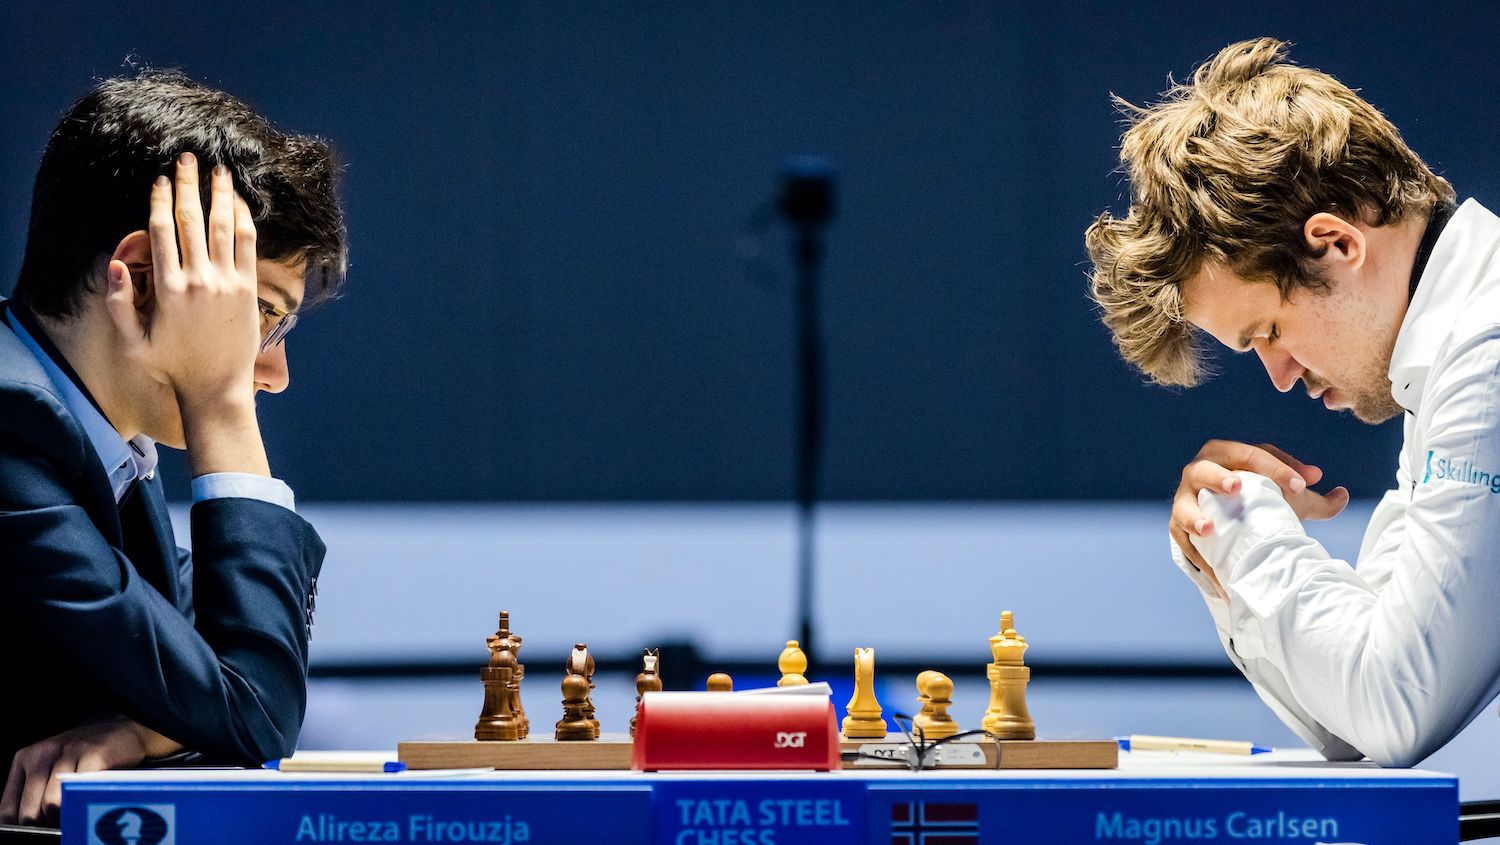 Iranian chess prodigy Alireza Firouzja (L), 17-years-old, plays against Norwegian chess grandmaster who is the current World Chess Champion Magnus Carlsen, 30-years-old, in the first round of the international chess tournament TataSteel Chess Tournament 2021 in Wijk aan Zee on January 16, 2021. (Photo by Remko de Waal / ANP / AFP) / Netherlands OUT (Photo by REMKO DE WAAL/ANP/AFP via Getty Images)